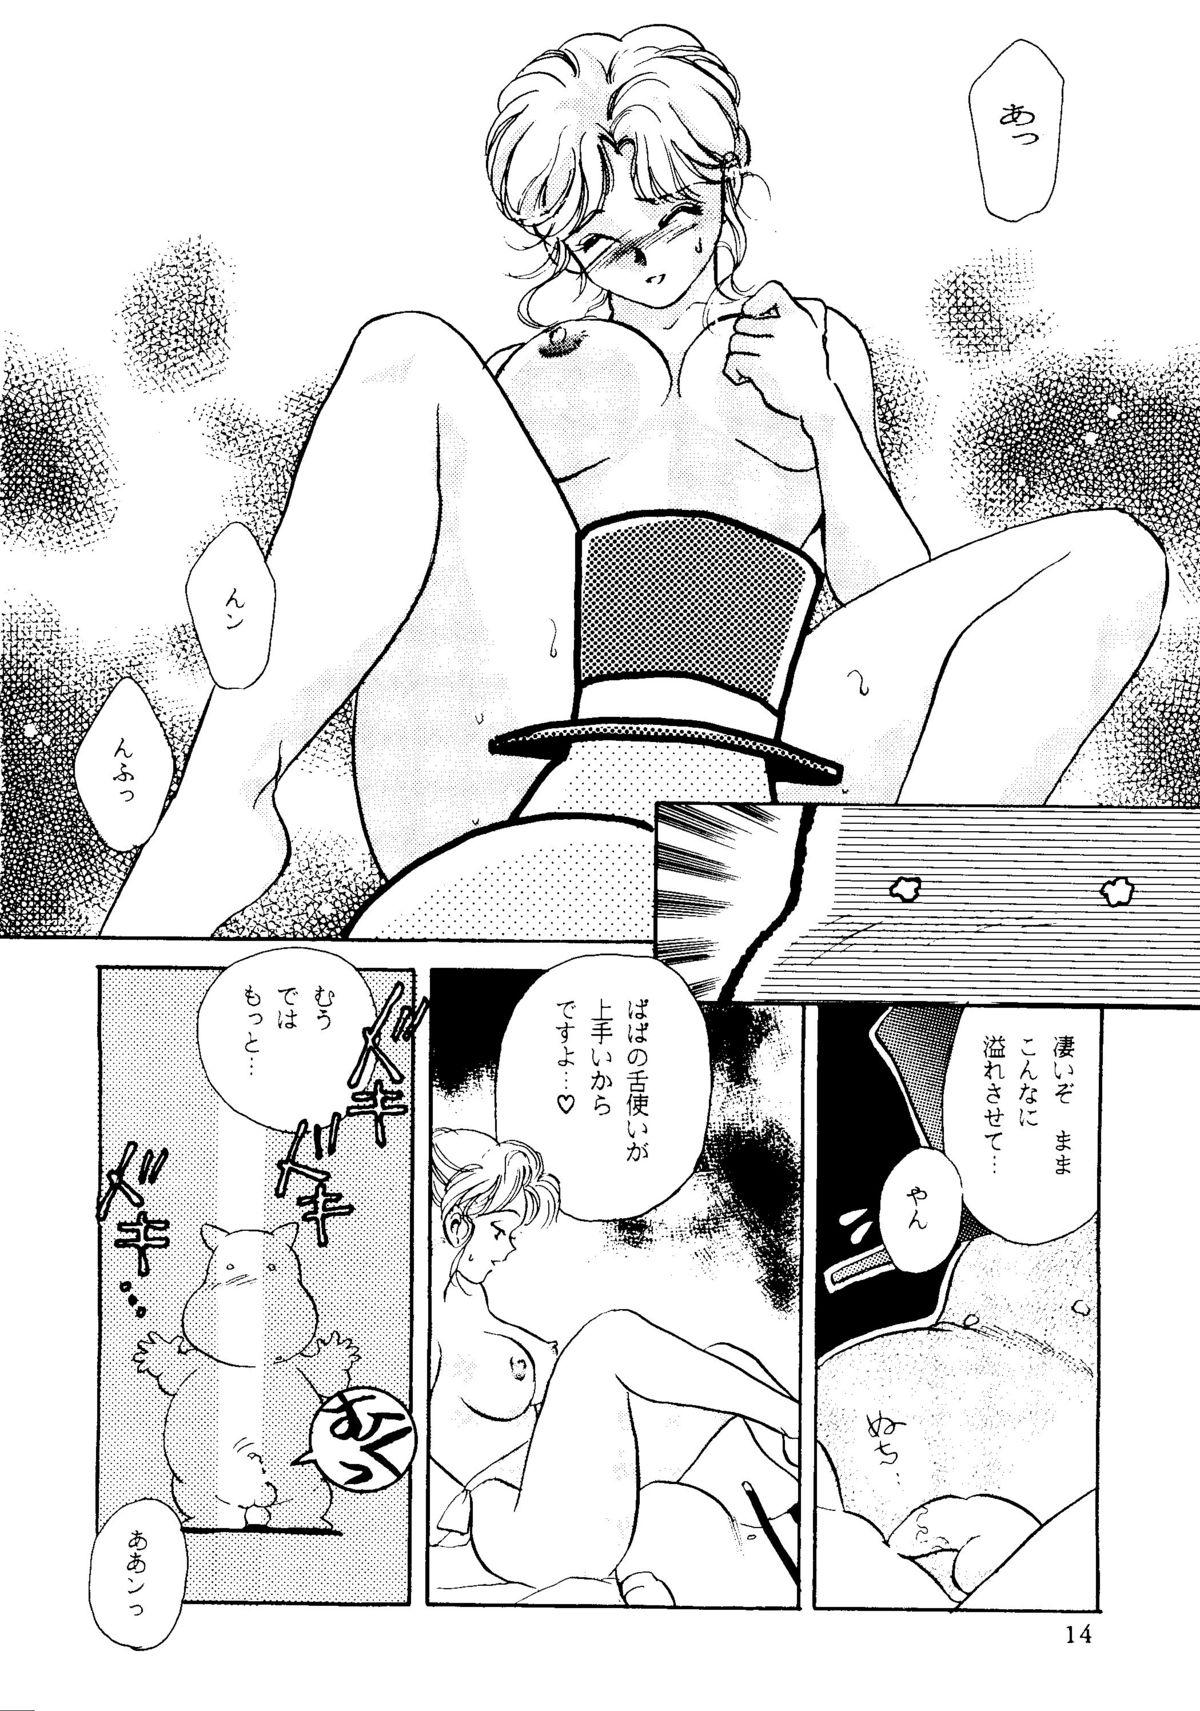 Pussy To Mouth R KIDS! Vol. 8 - Sailor moon Street fighter Tenchi muyo Red baron Amateur Sex - Page 10